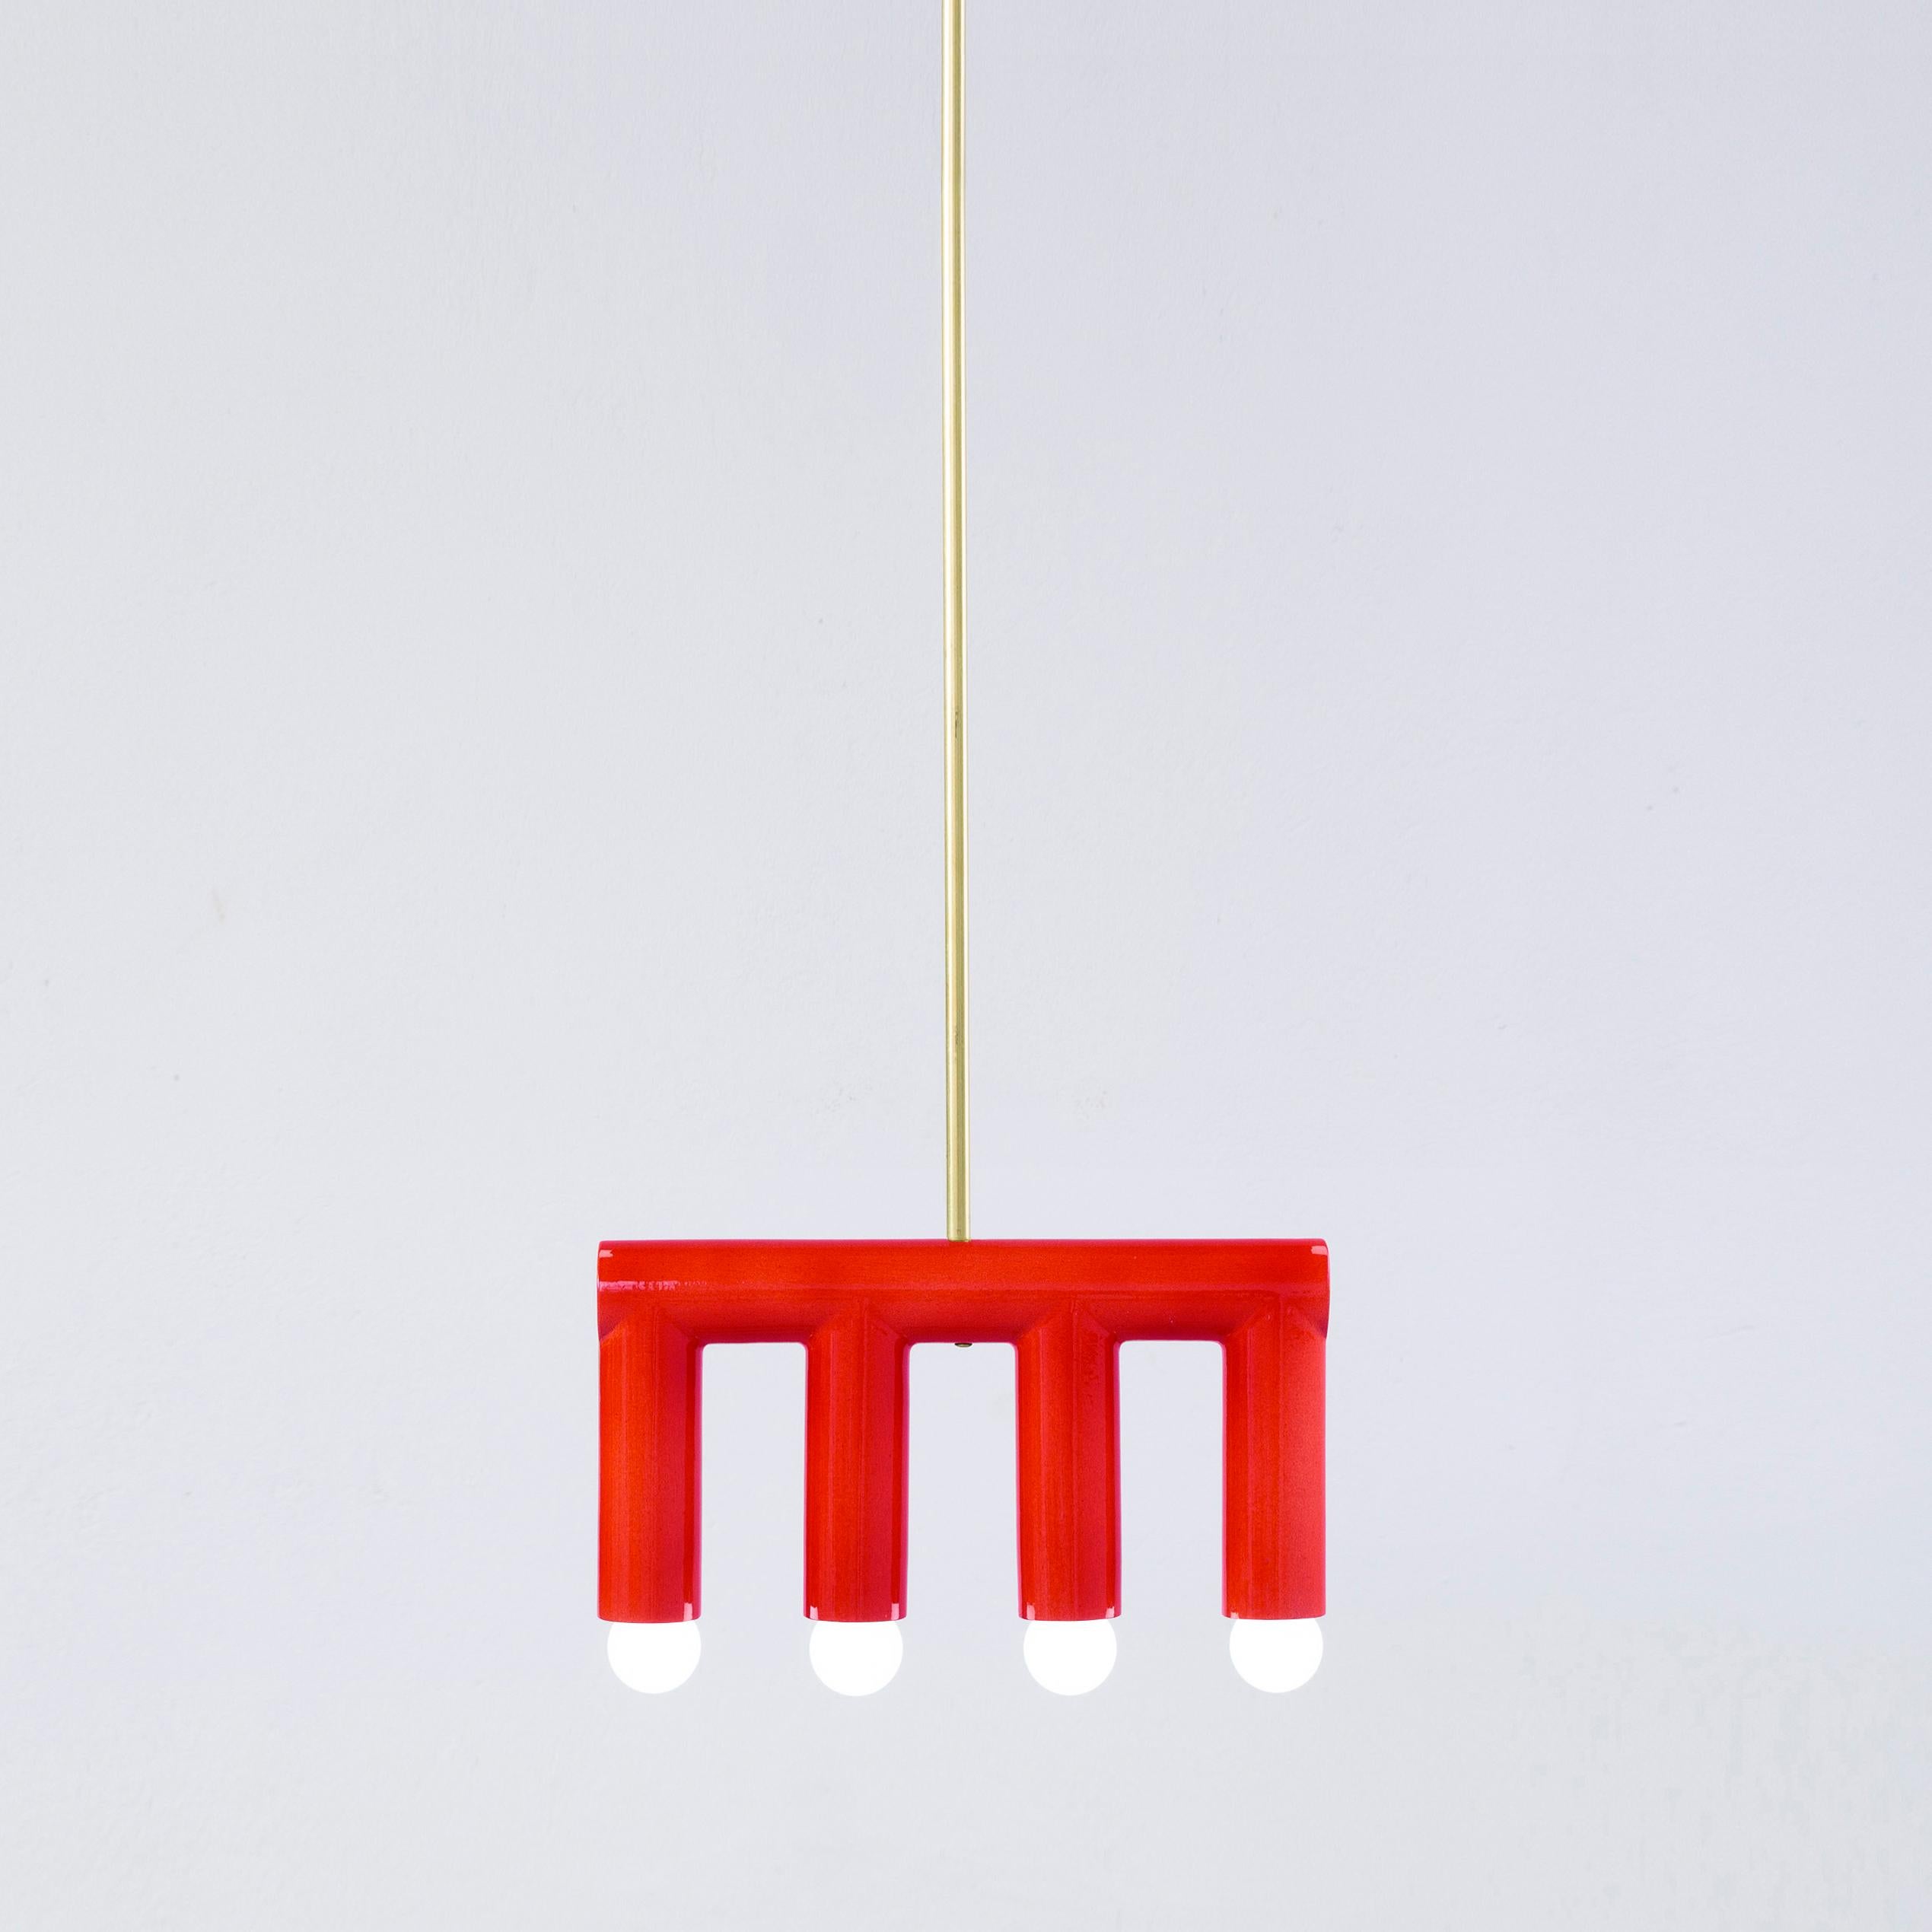 Red TRN B3 pendant lamp by Pani Jurek
Dimensions: D 5 x W 35 x H 18 cm 
Material: Hand glazed ceramic and brass.
Available in other colors.
Lamps from the TRN collection hang on a metal tube, not on a cable. This allows the lamp to be mounted in a